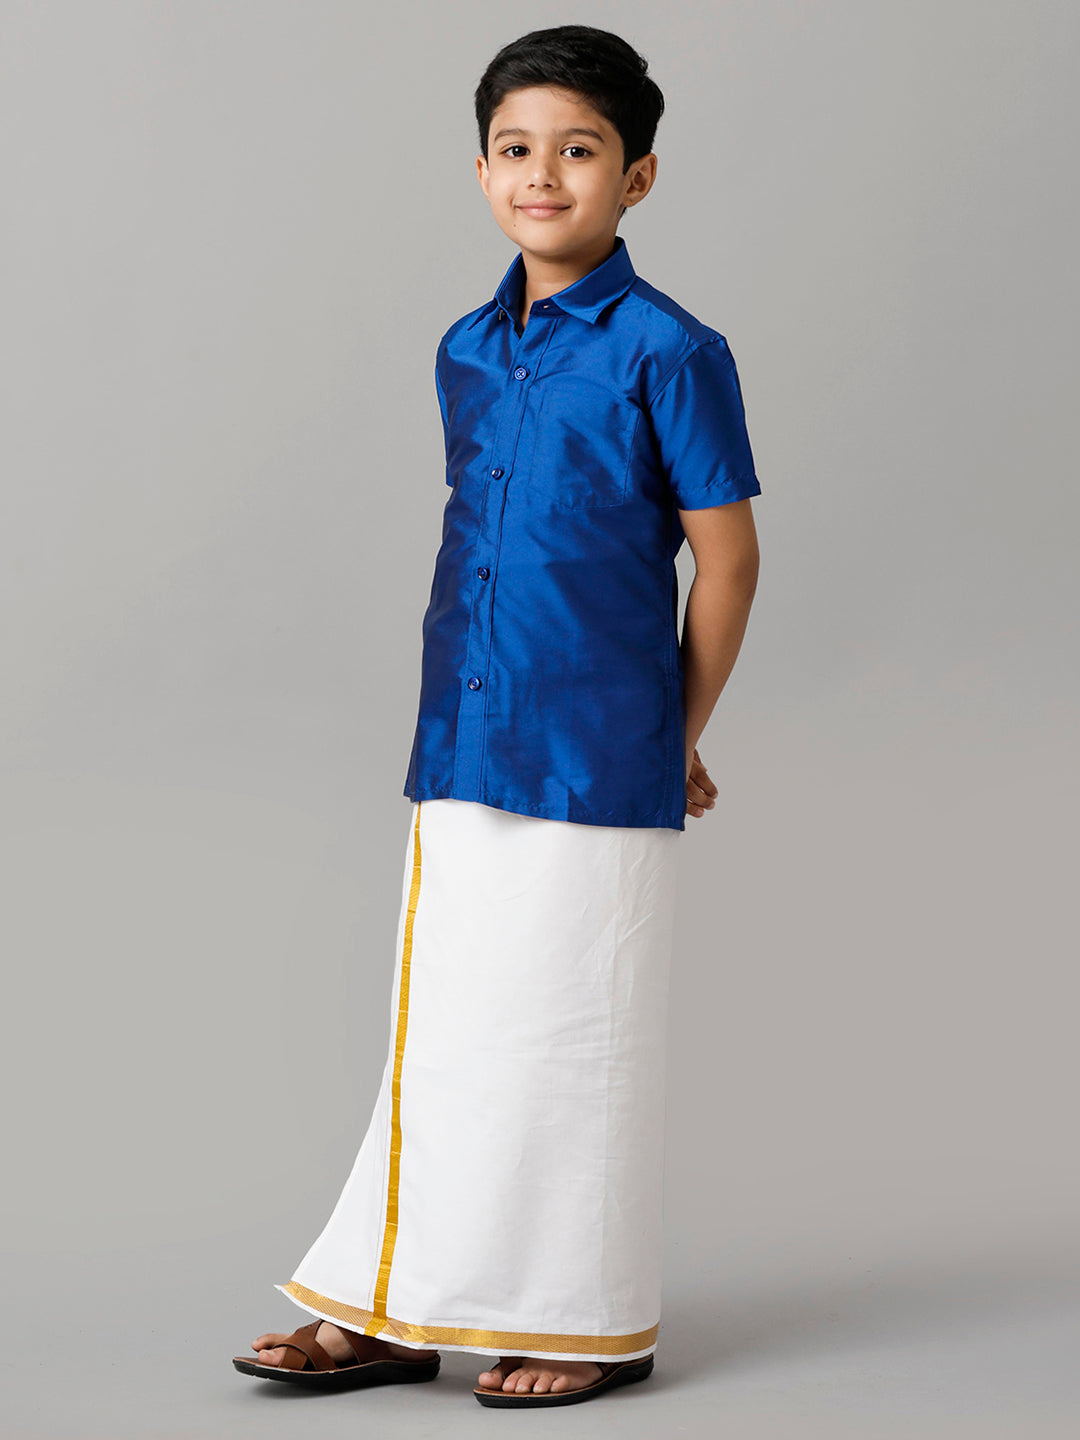 Boys Silk Cotton Light Blue Half Sleeves Shirt with Adjustable White Dhoti Combo K5-Frontt view